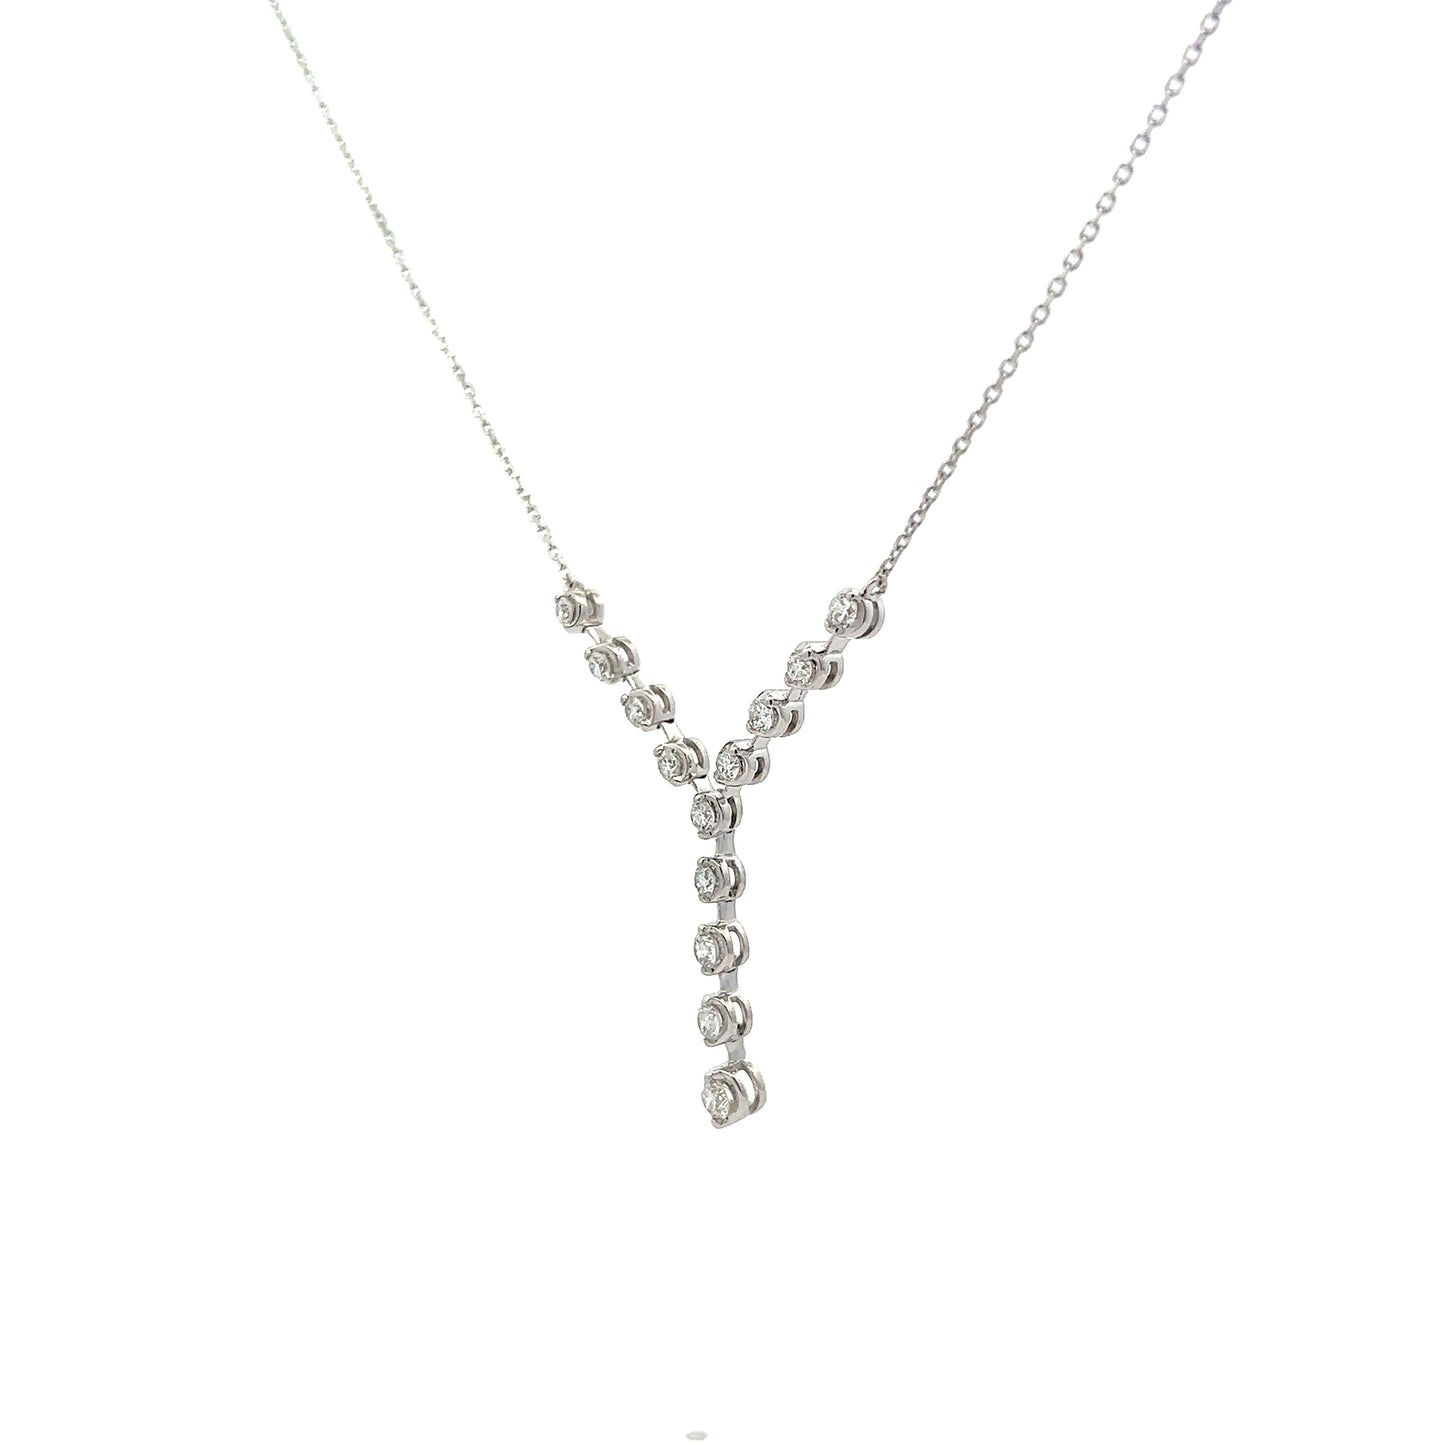 Y Shaped Diamond Pendant Necklace in White Gold